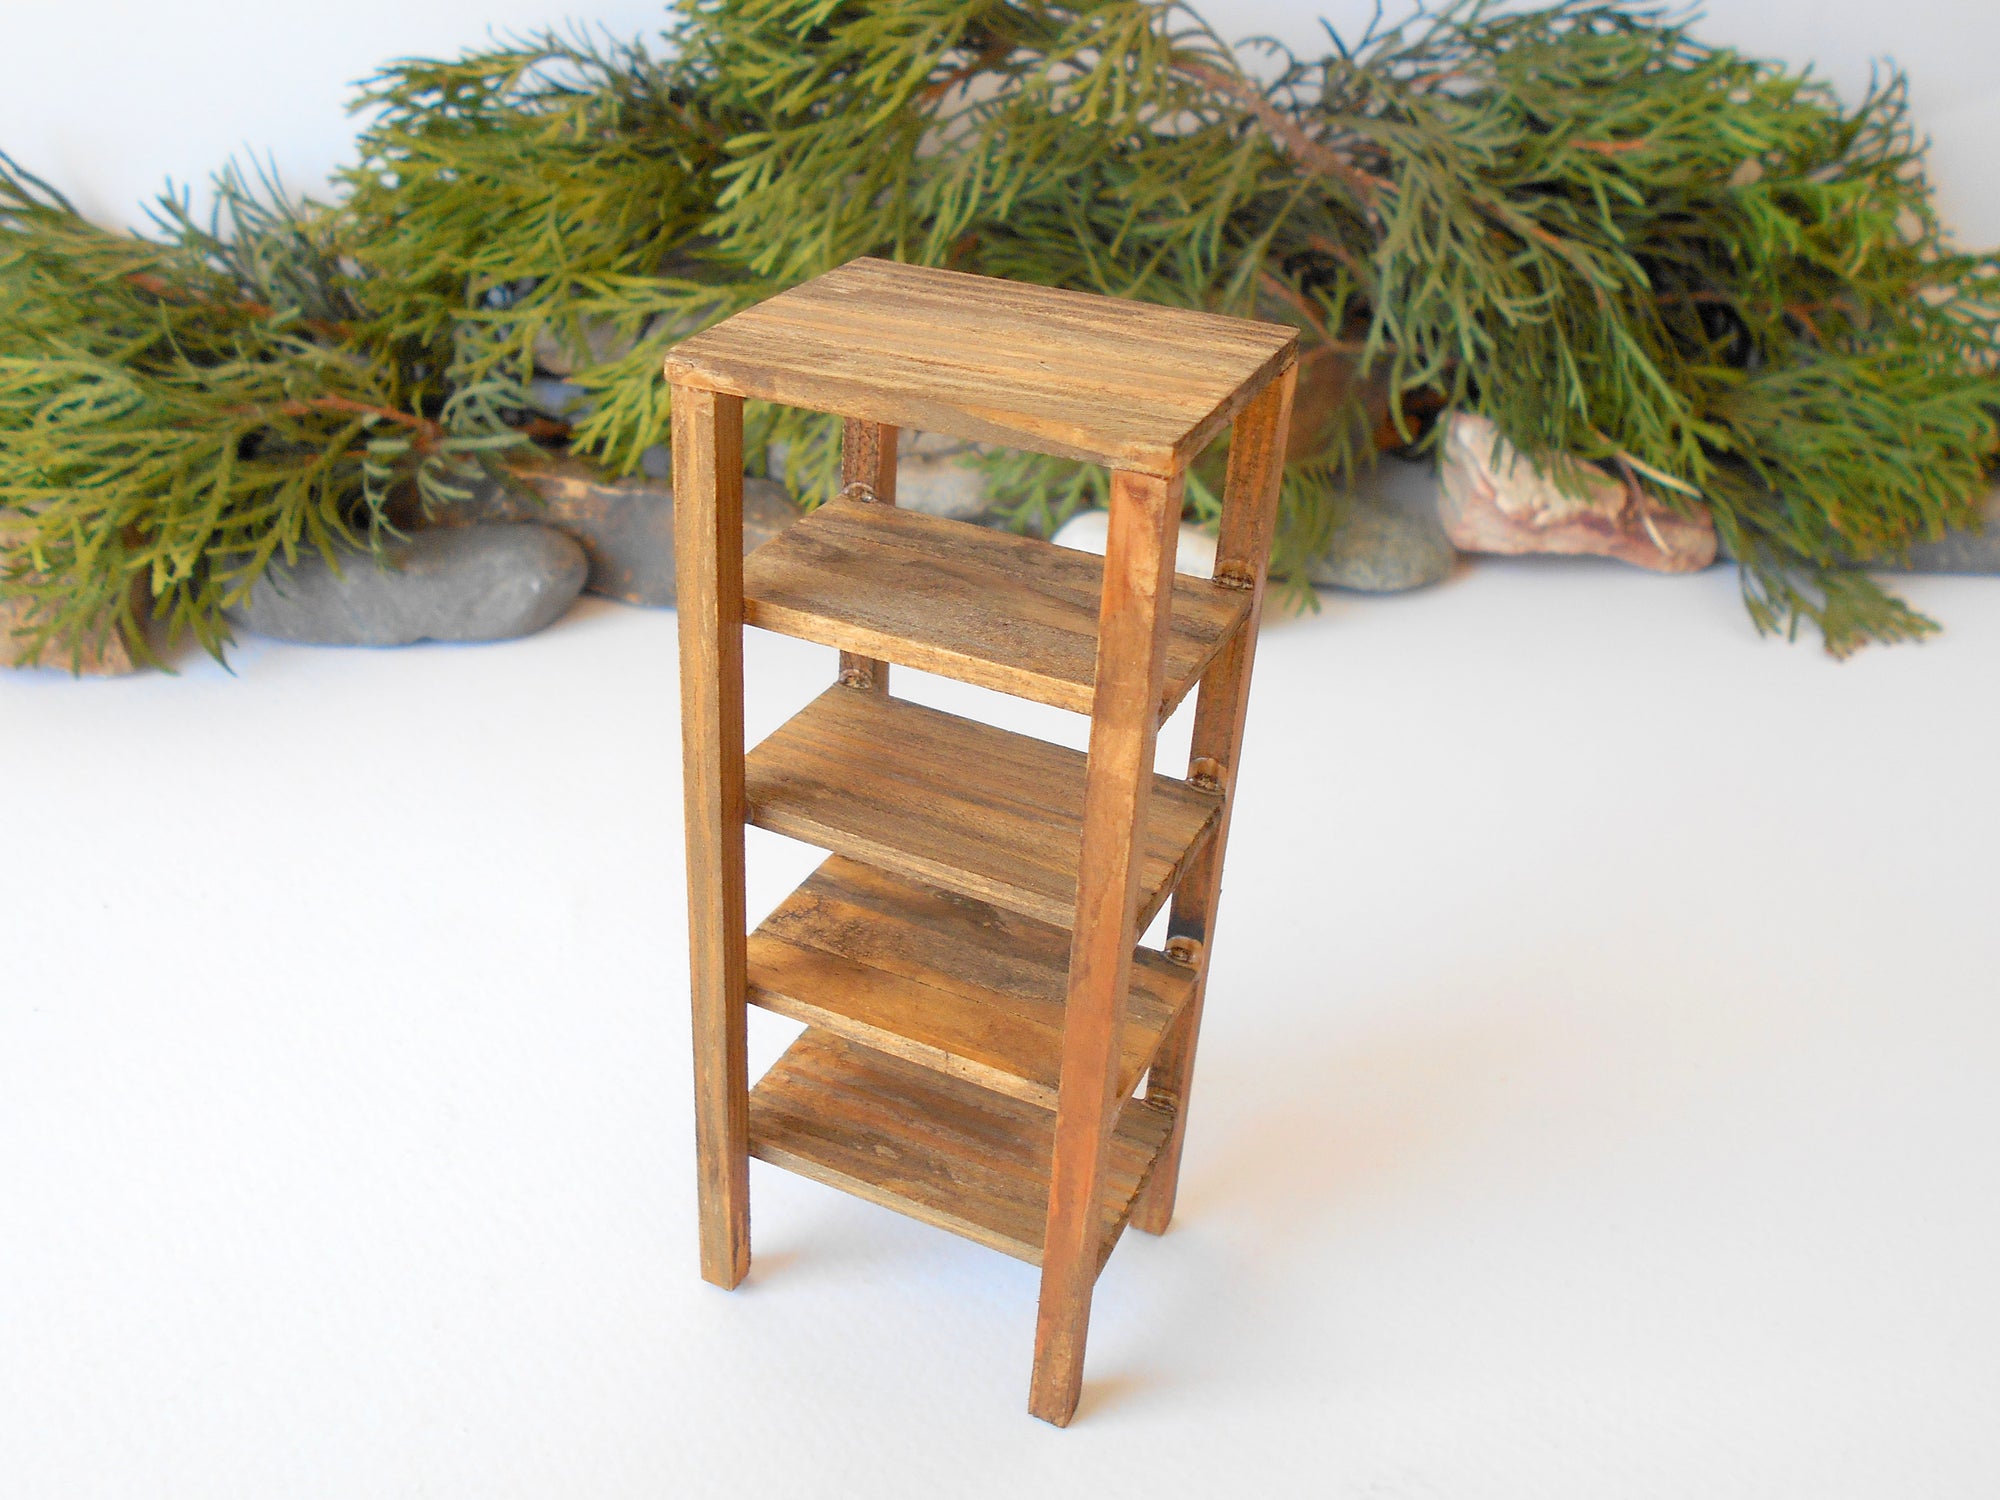 This is a Miniature shelf of wooden furniture that is approximately 1/12 in scale. I have stained the shelf with light brown Italian eco-friendly mordant.&nbsp;